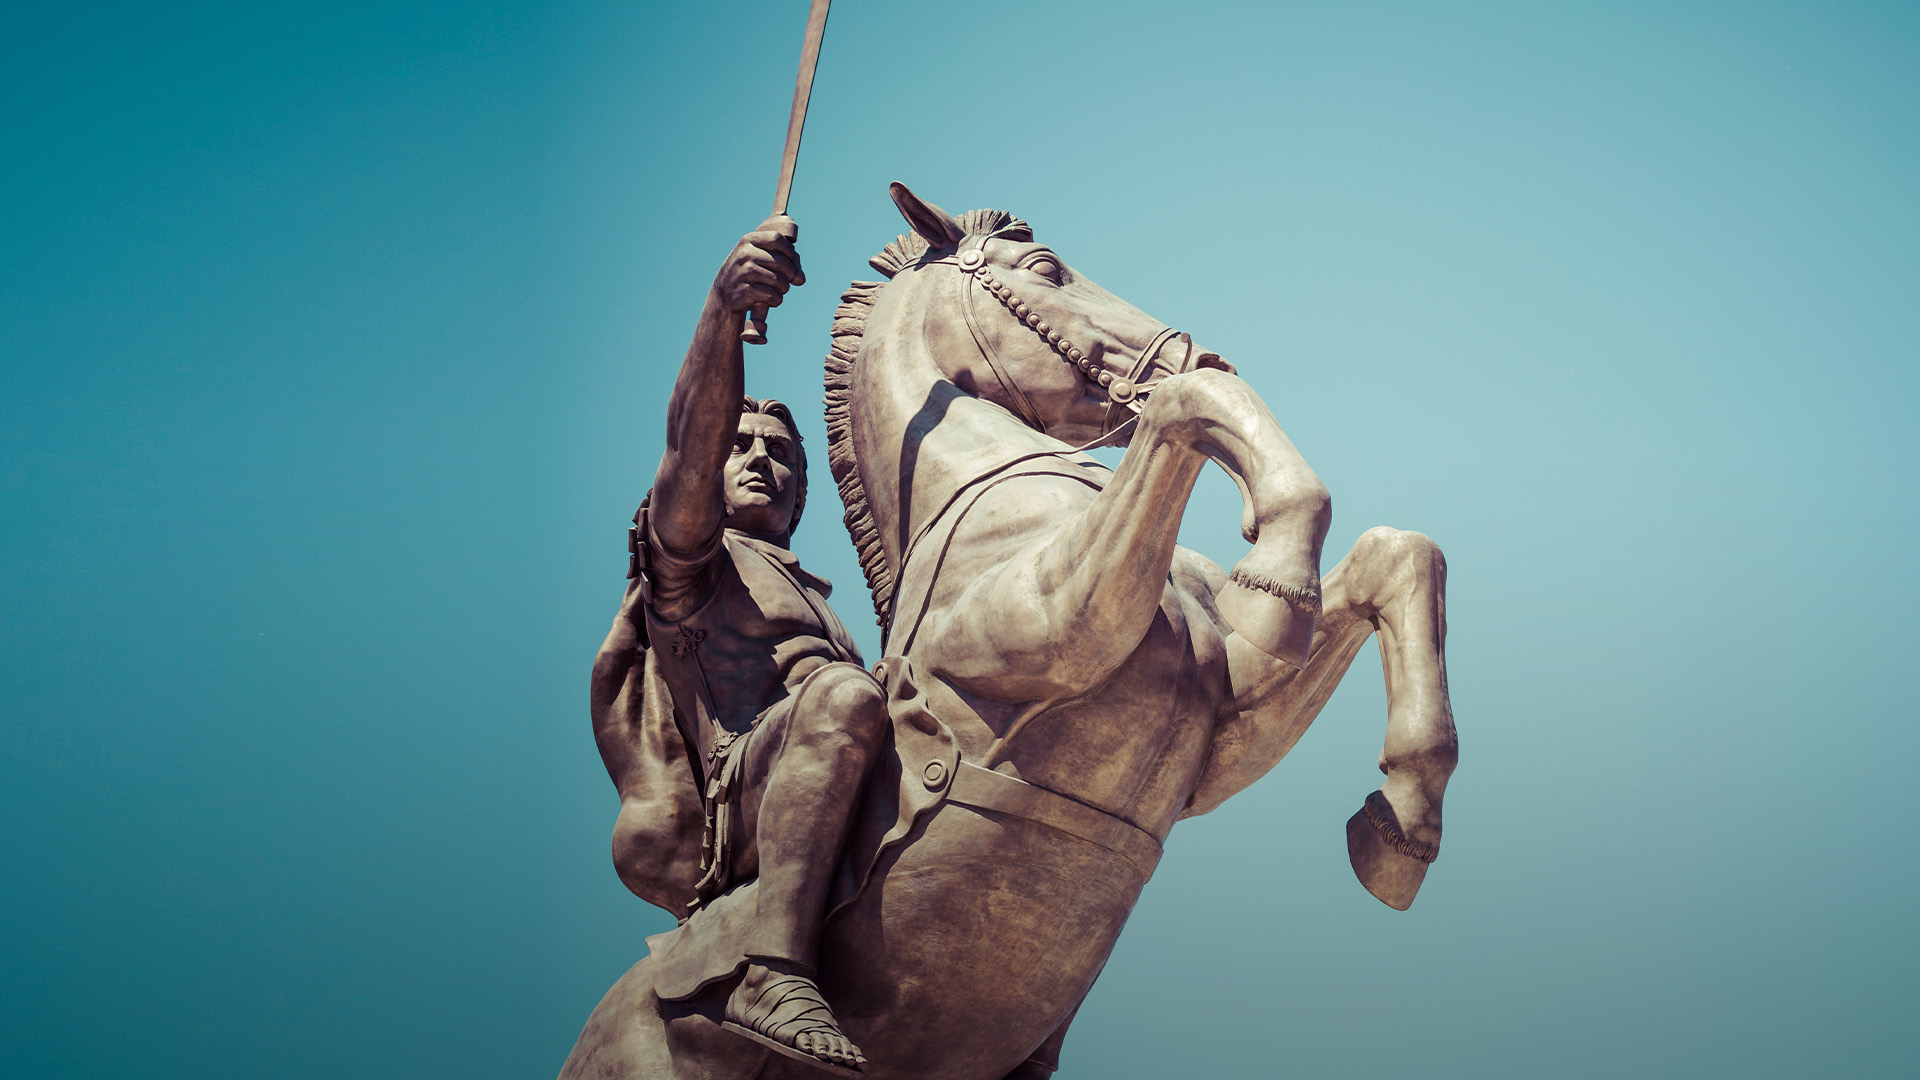 Warrior on a Horse statue Alexander the Great on Skopje Square